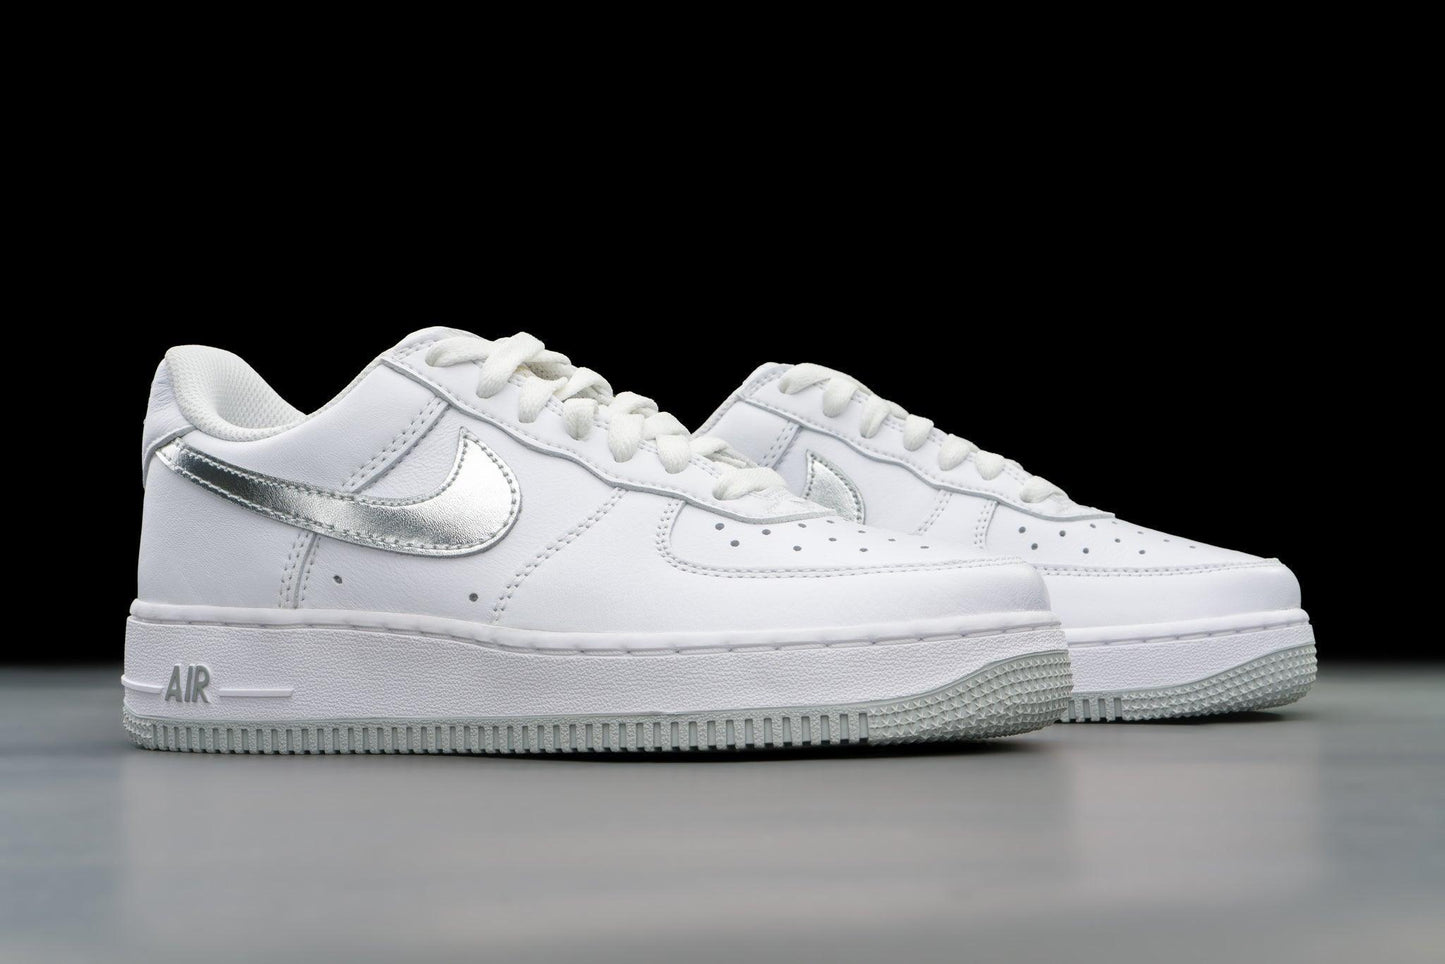 Nike Air Force 1 '07 Low Color of the Month White Metallic Silver - Lo10M